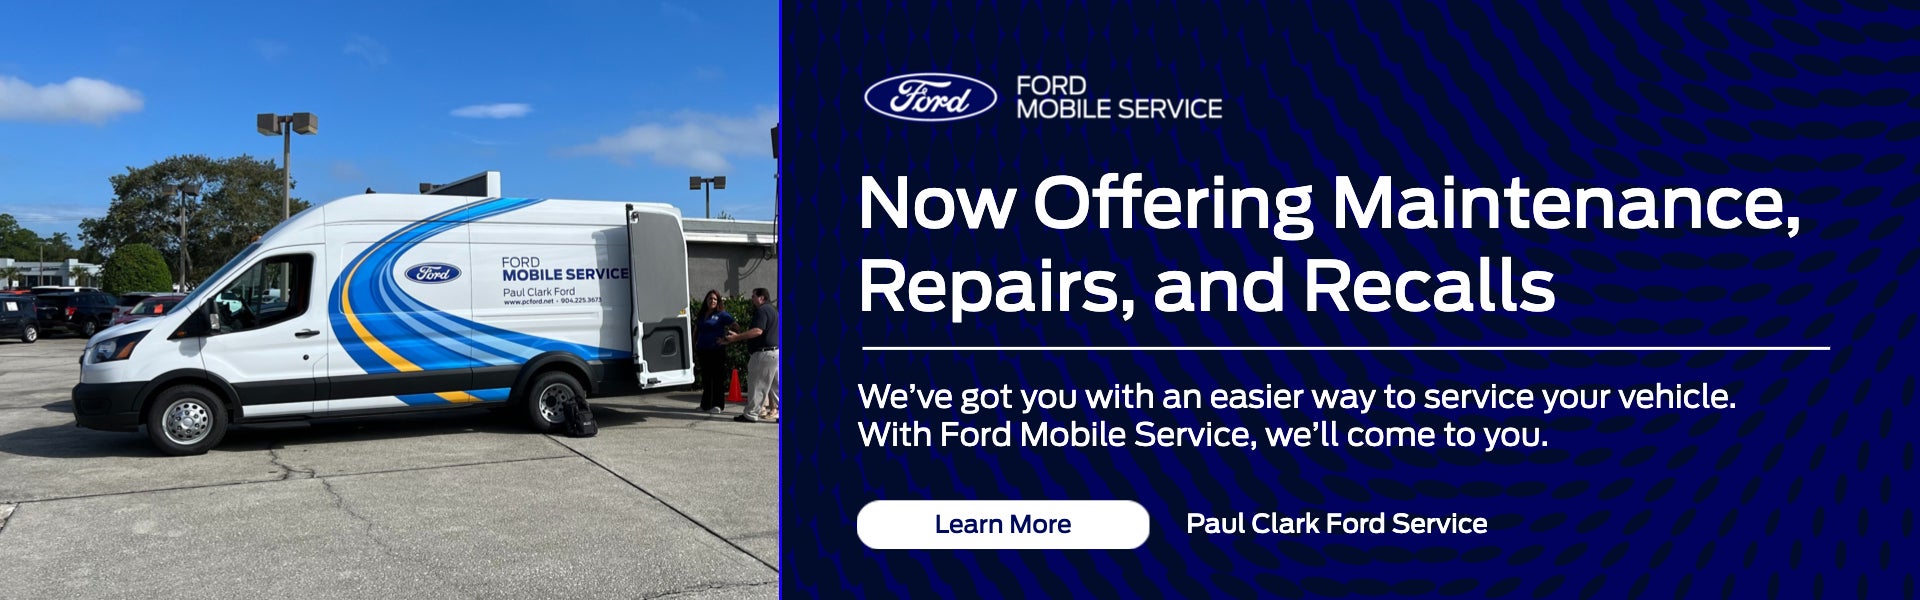 Paul Clark Ford Mobile Service